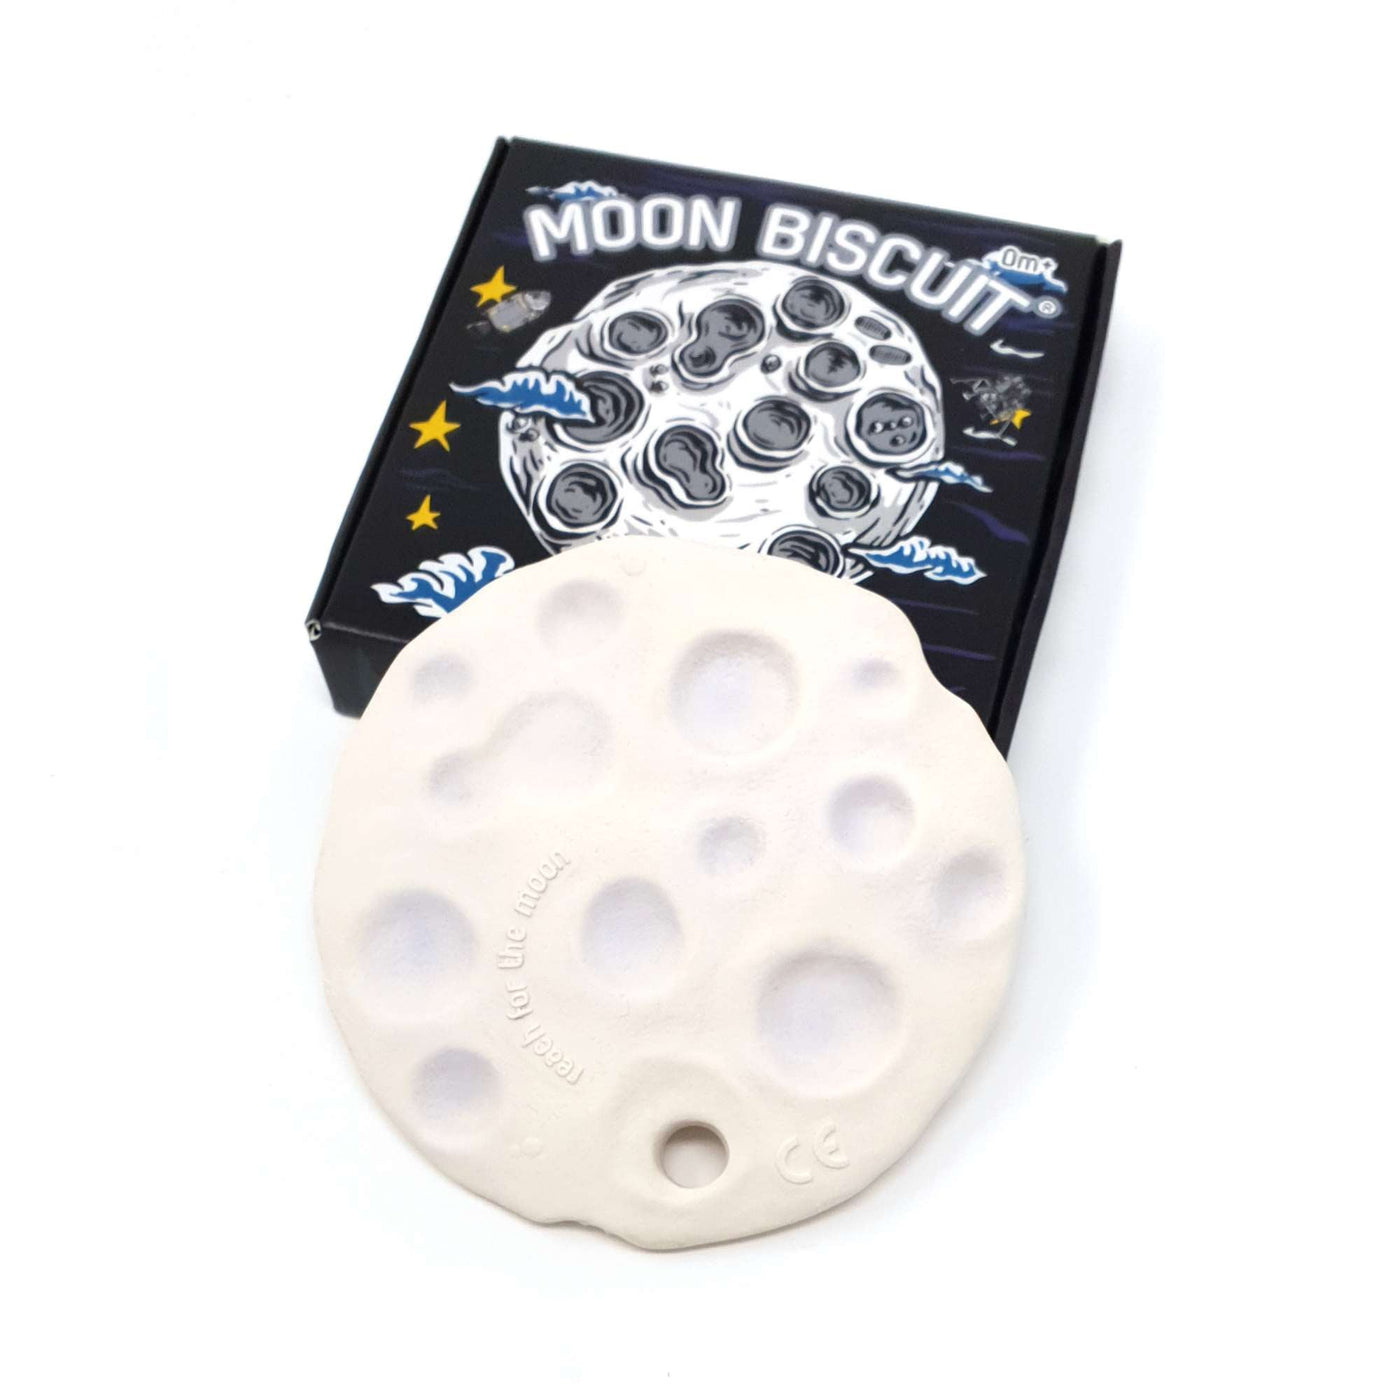 Moon Biscuit Natural Rubber Space Toy rear side with box by Thumble Baby Care